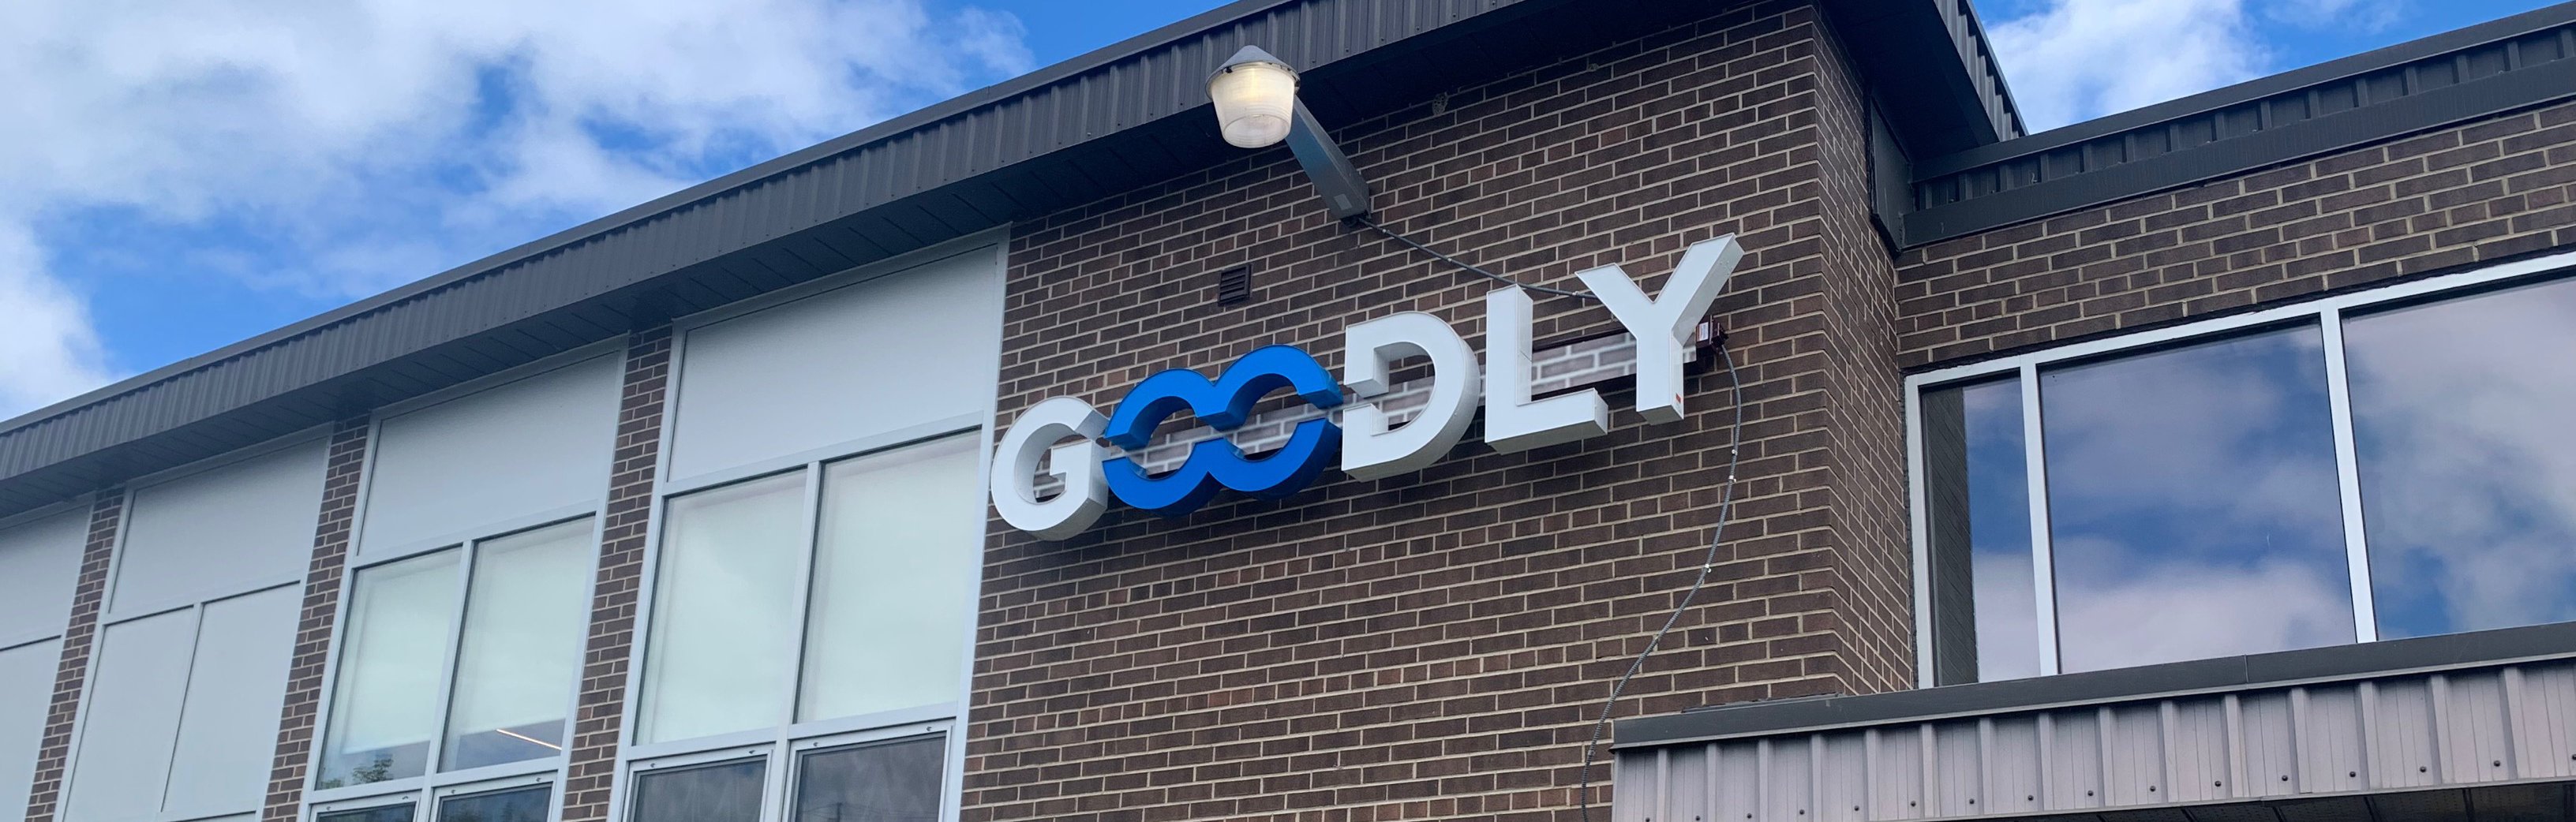 Goodly Cloud Global Headquarters